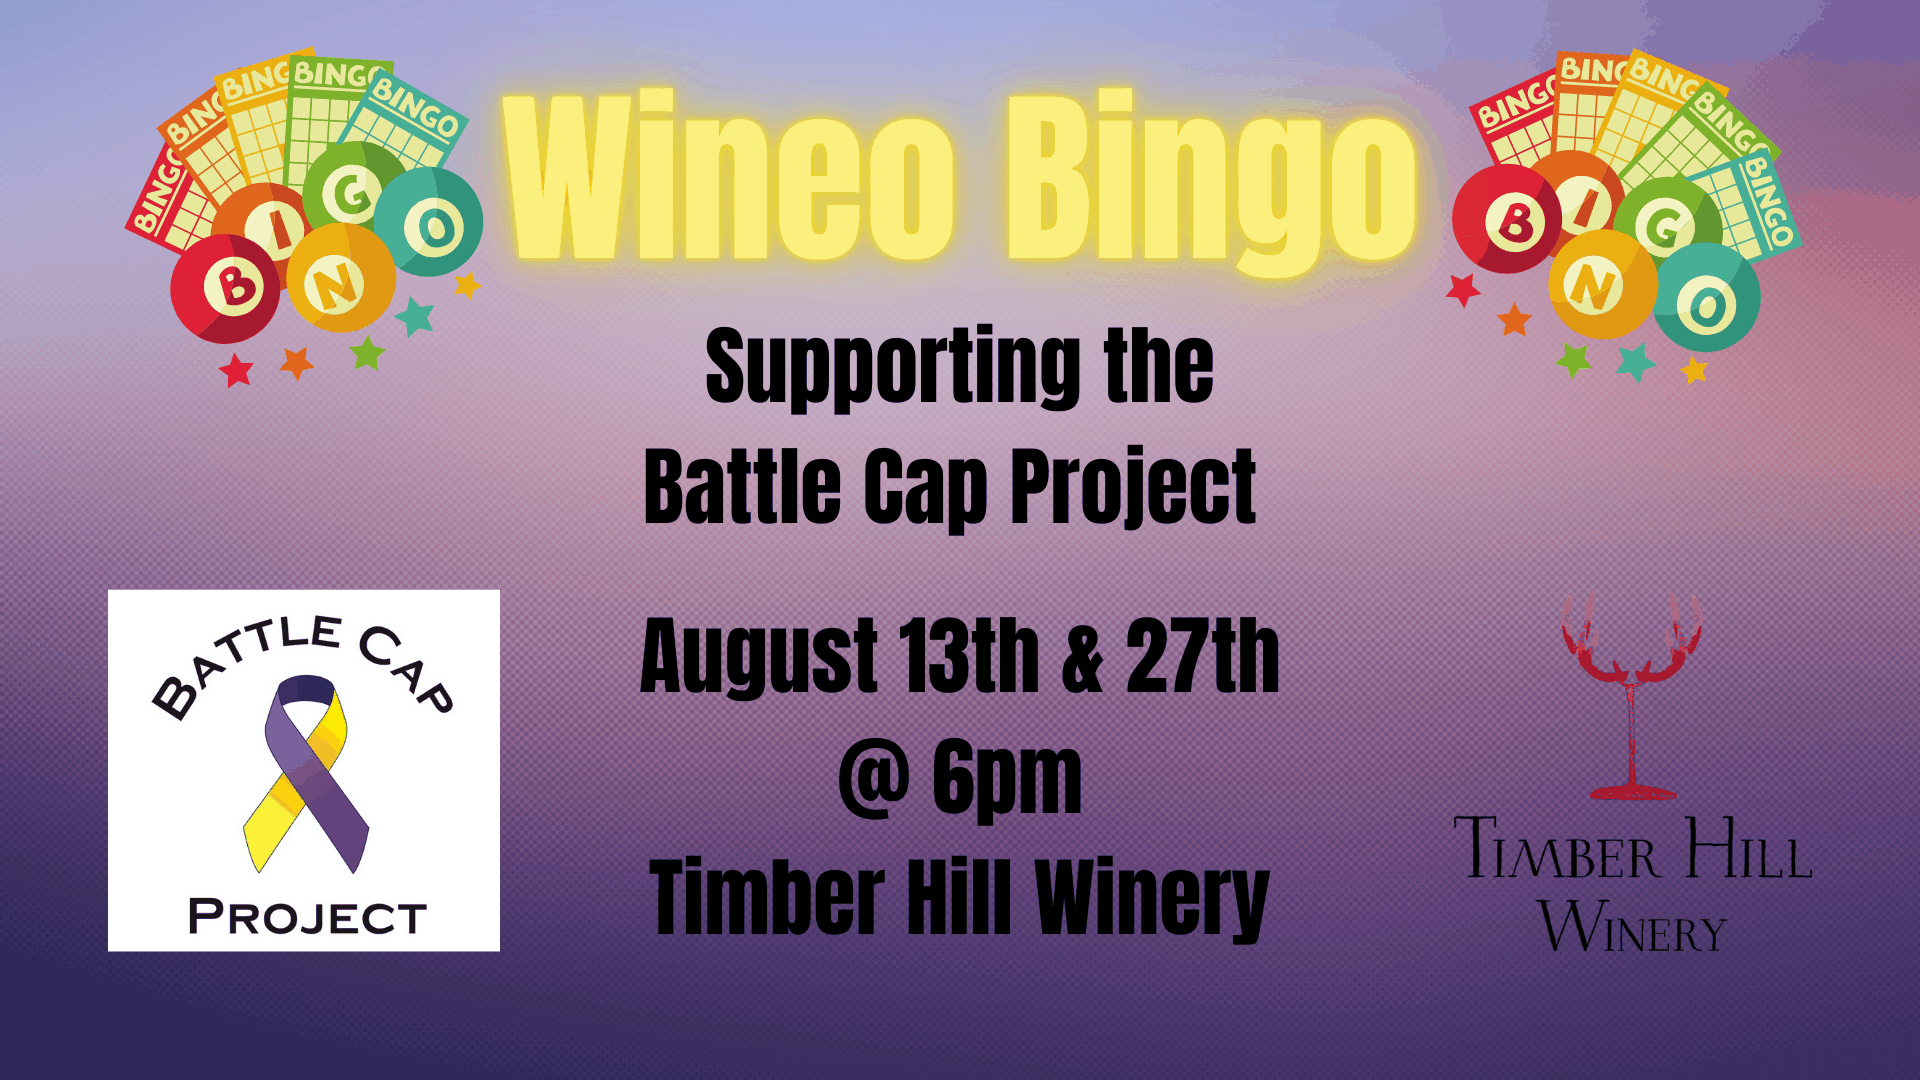 Battle Cap Project Wineo Bingo at Timber Hill Winery Milton, WI